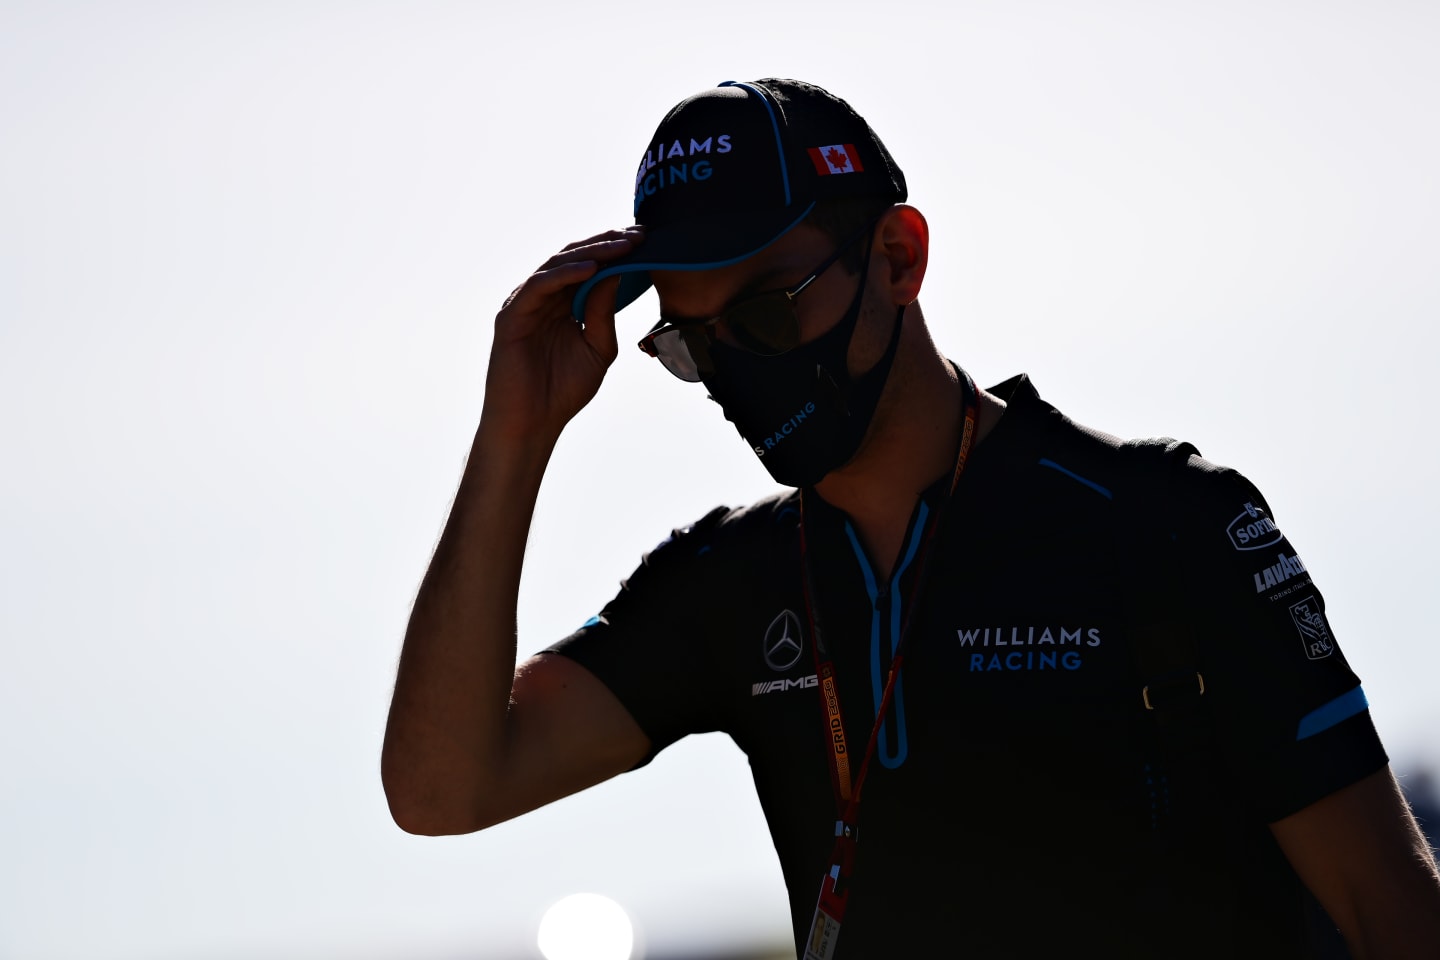 NORTHAMPTON, ENGLAND - AUGUST 07: Nicholas Latifi of Canada and Williams walks in the Paddock before practice for the F1 70th Anniversary Grand Prix at Silverstone on August 07, 2020 in Northampton, England. (Photo by Mario Renzi - Formula 1/Formula 1 via Getty Images)